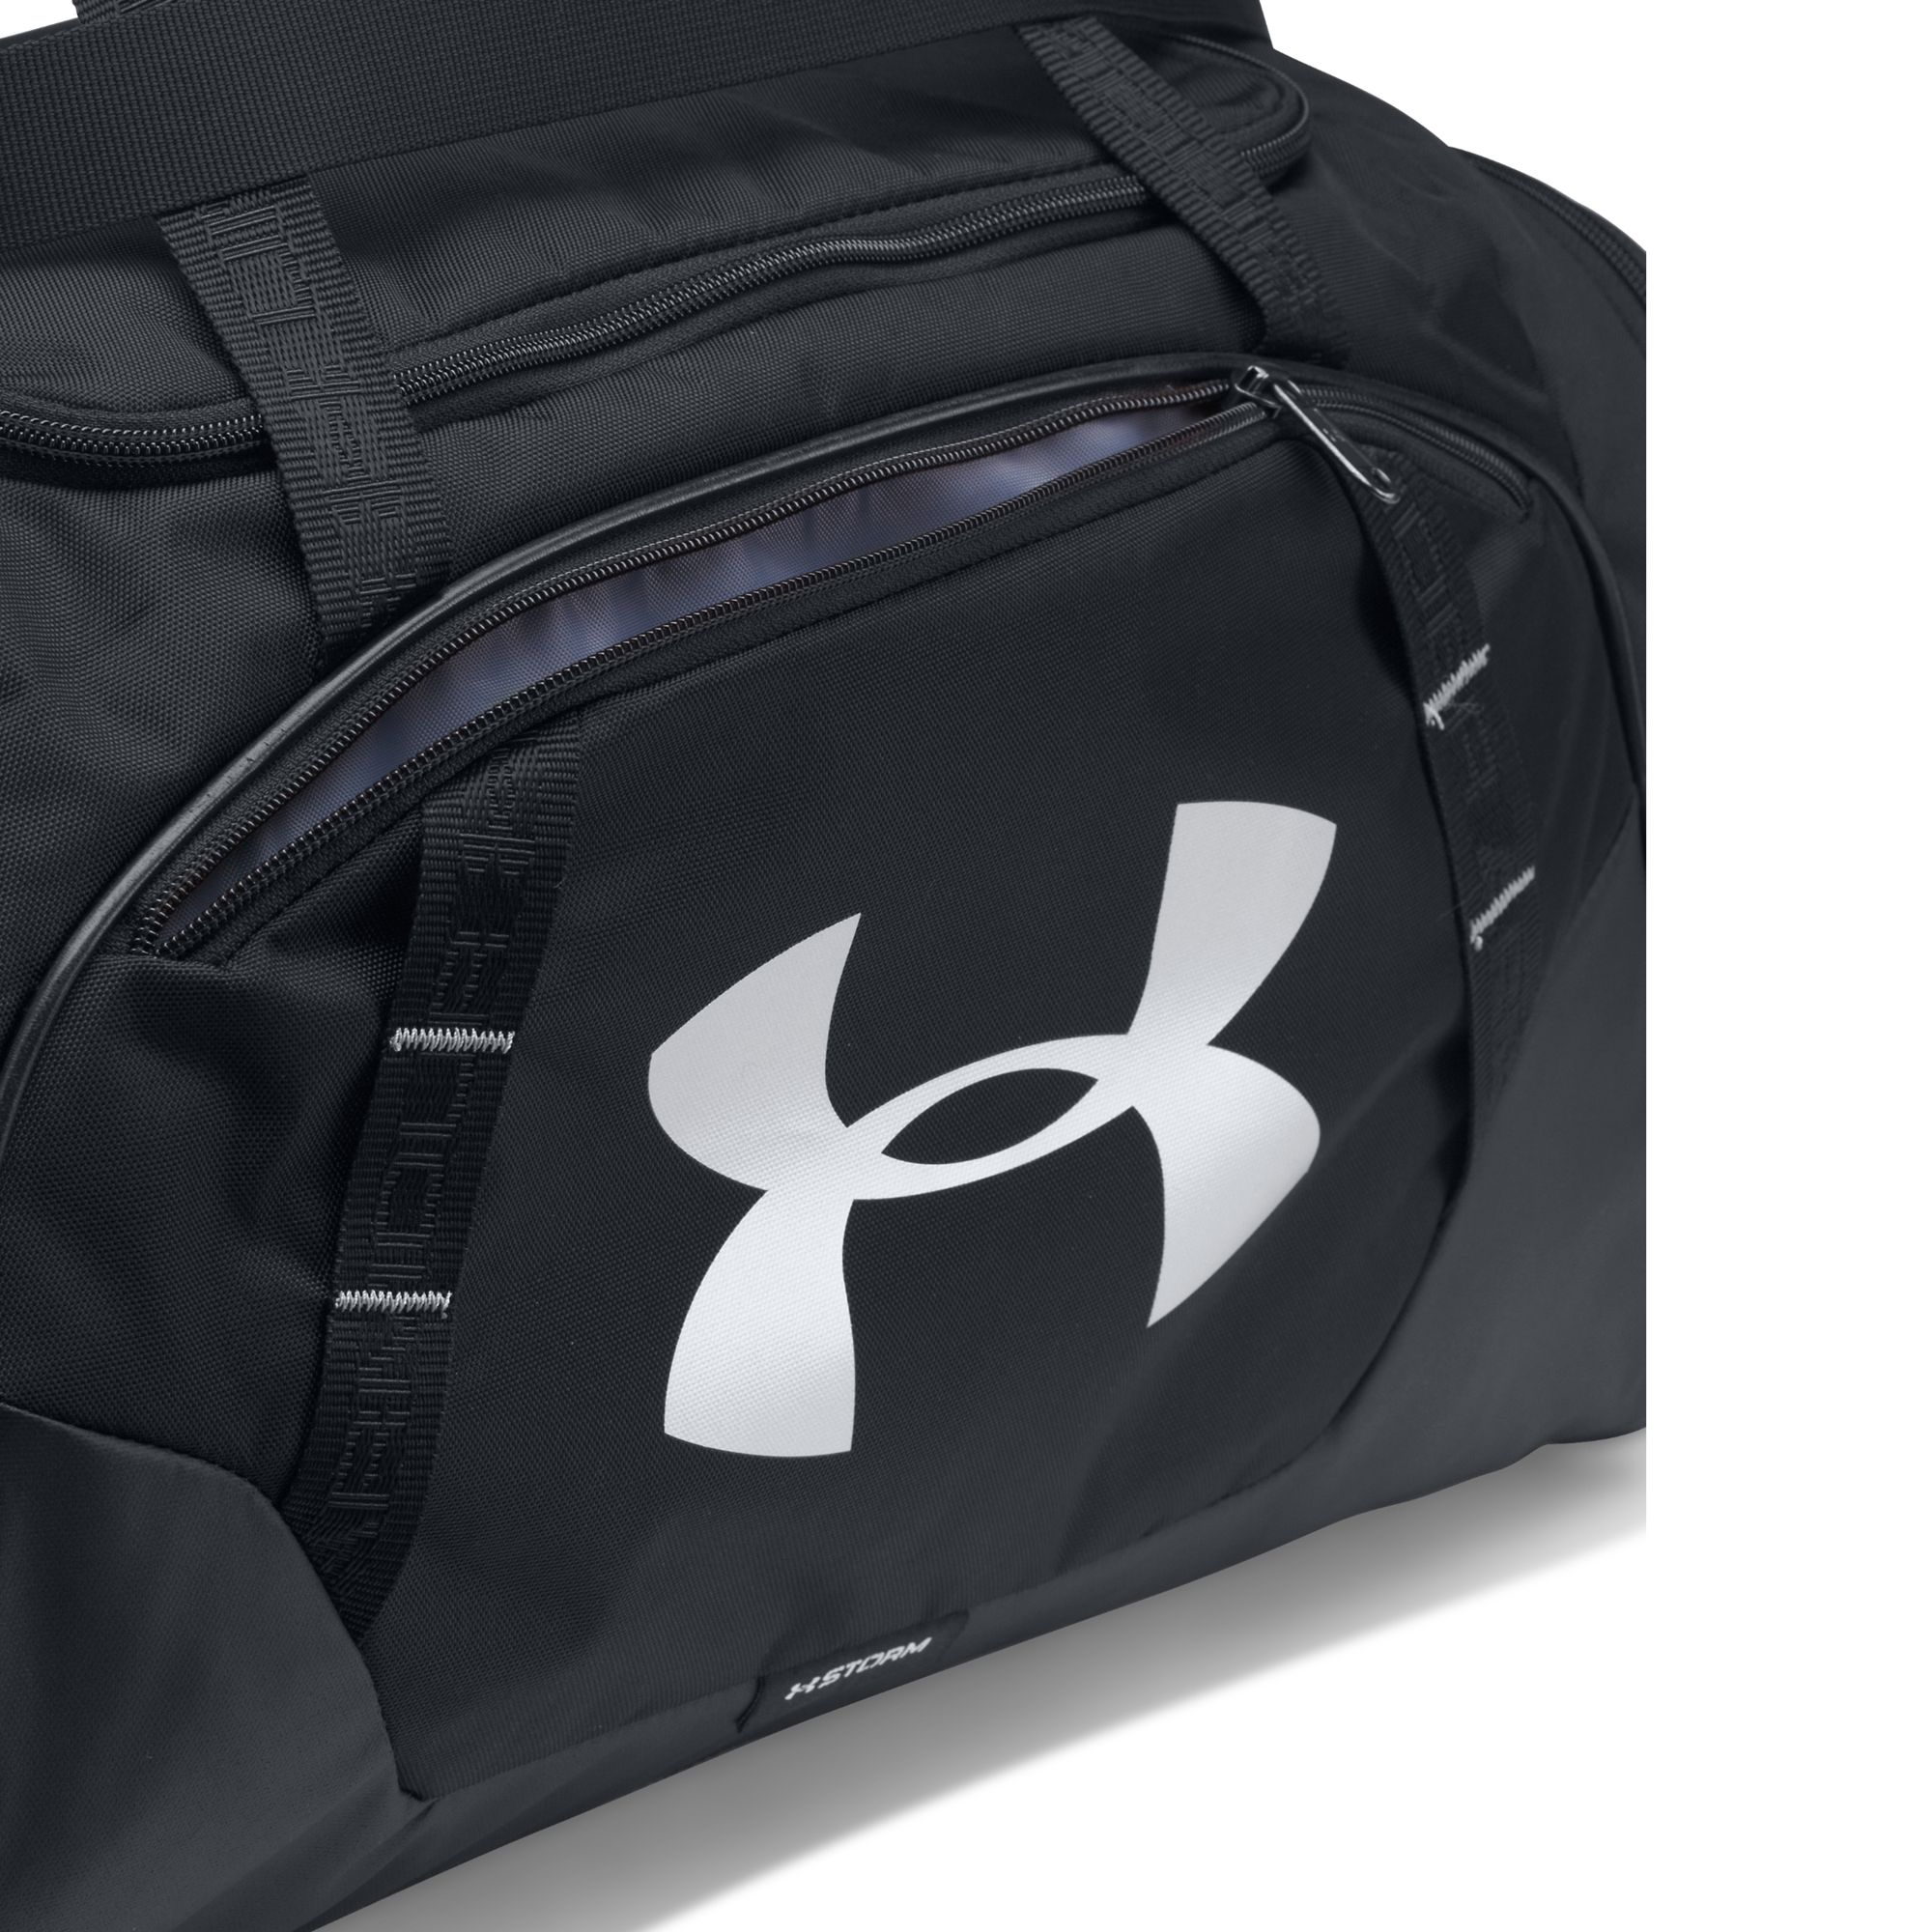 under armour undeniable 3.0 large duffle